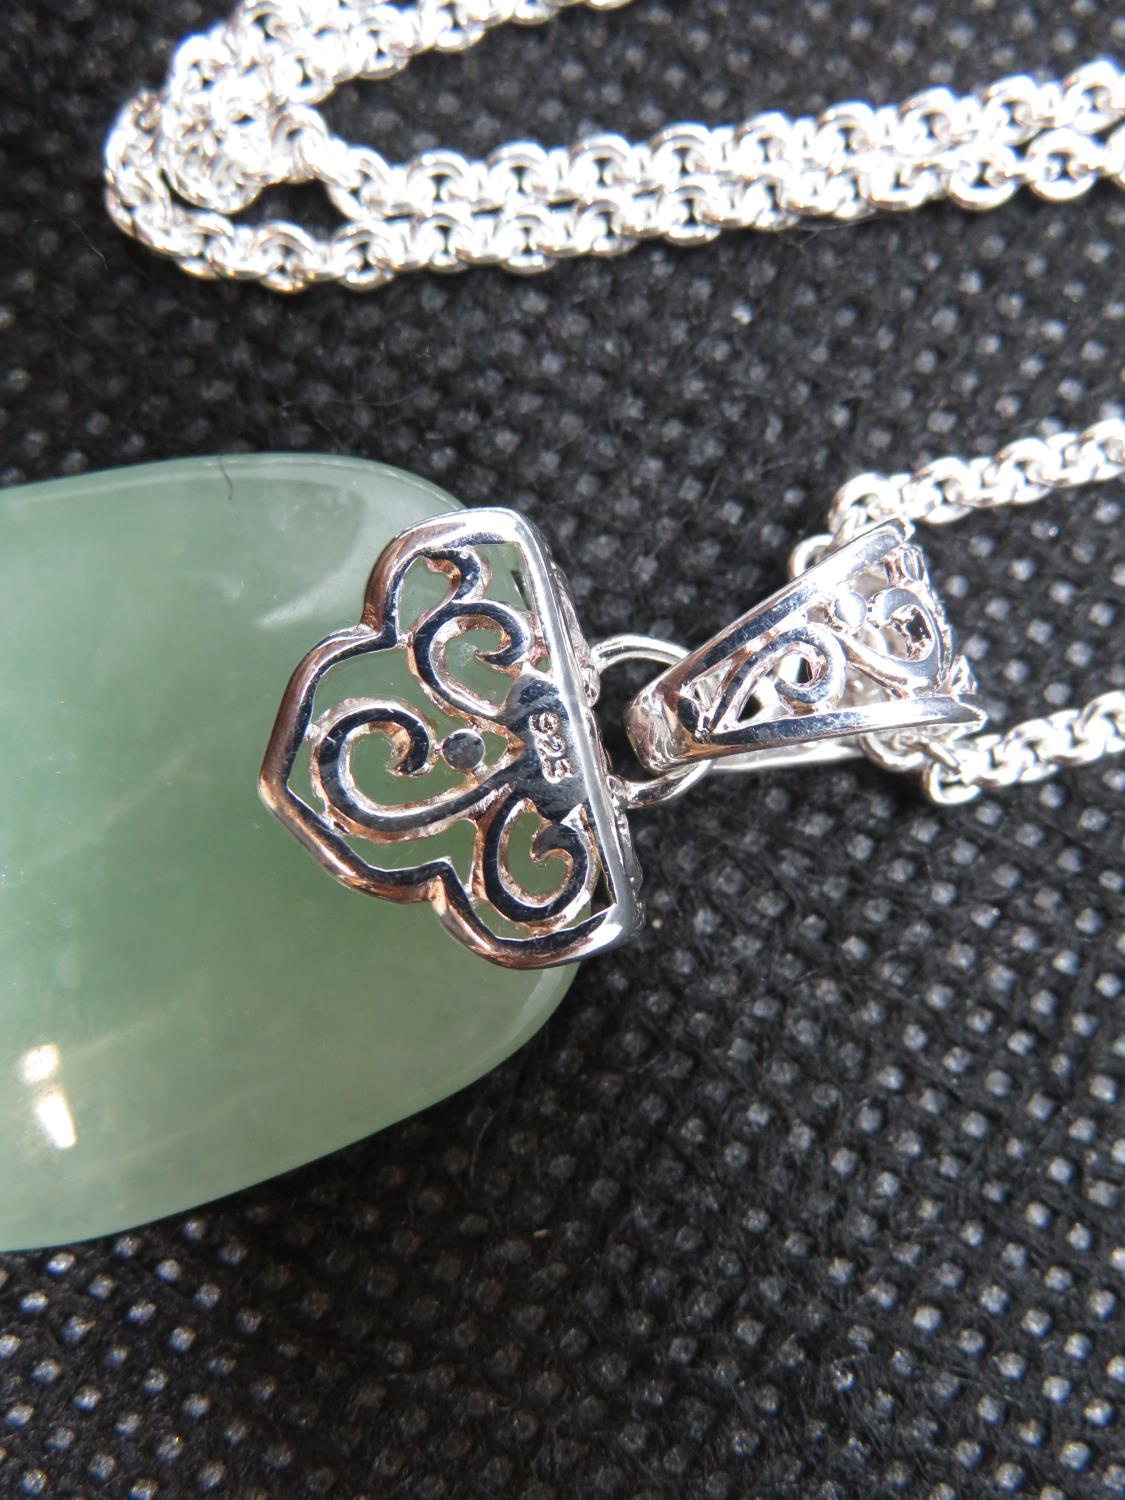 Jade and silver pendant on 20" silver chain 15.5g - Image 3 of 3